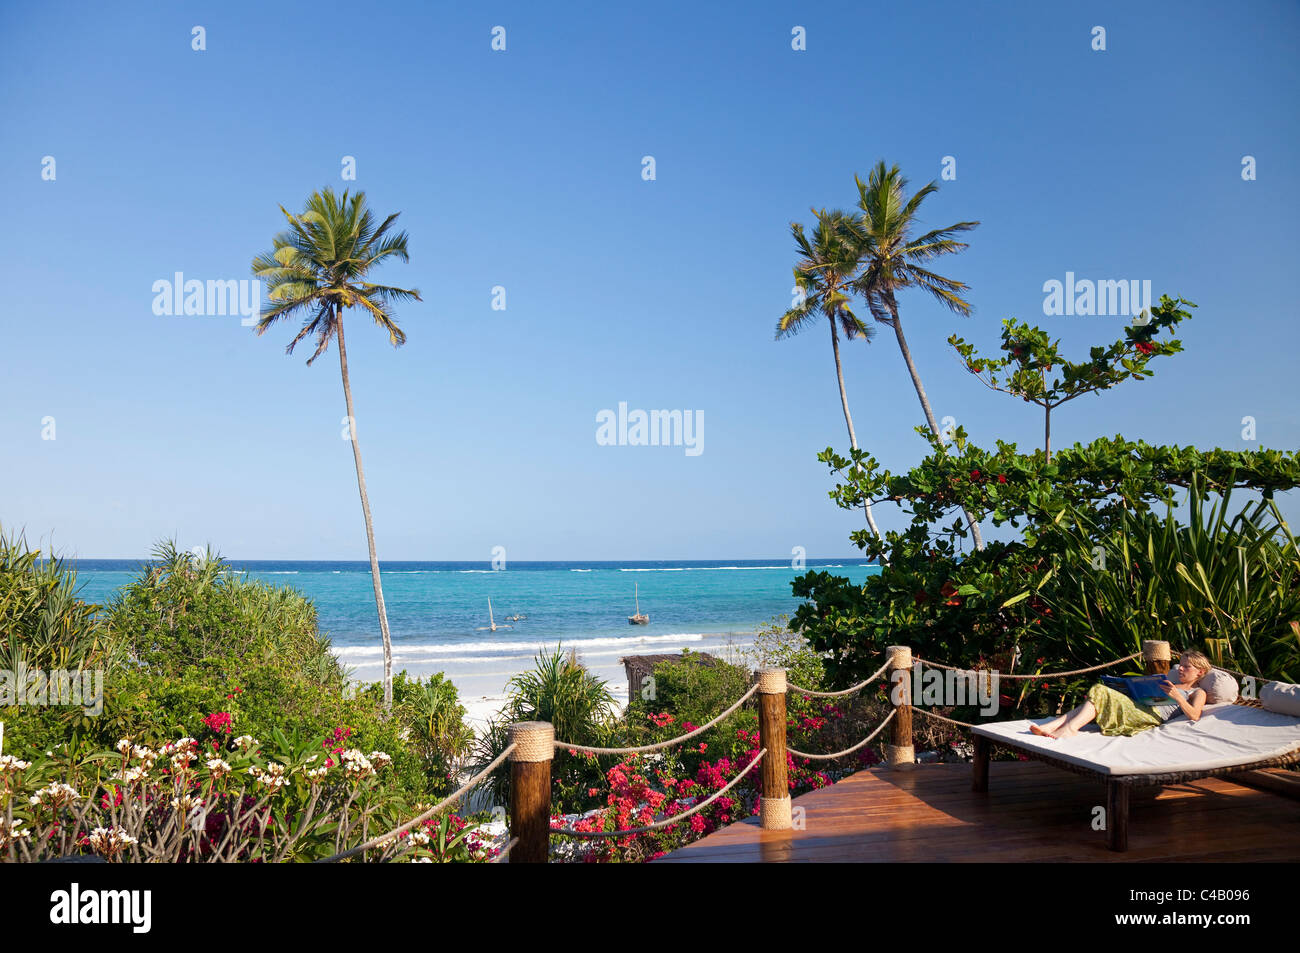 Zanzibar, Matemwe Bungalows. A guest relaxes on her sunbed, overlooking the private beach. MR. Stock Photo